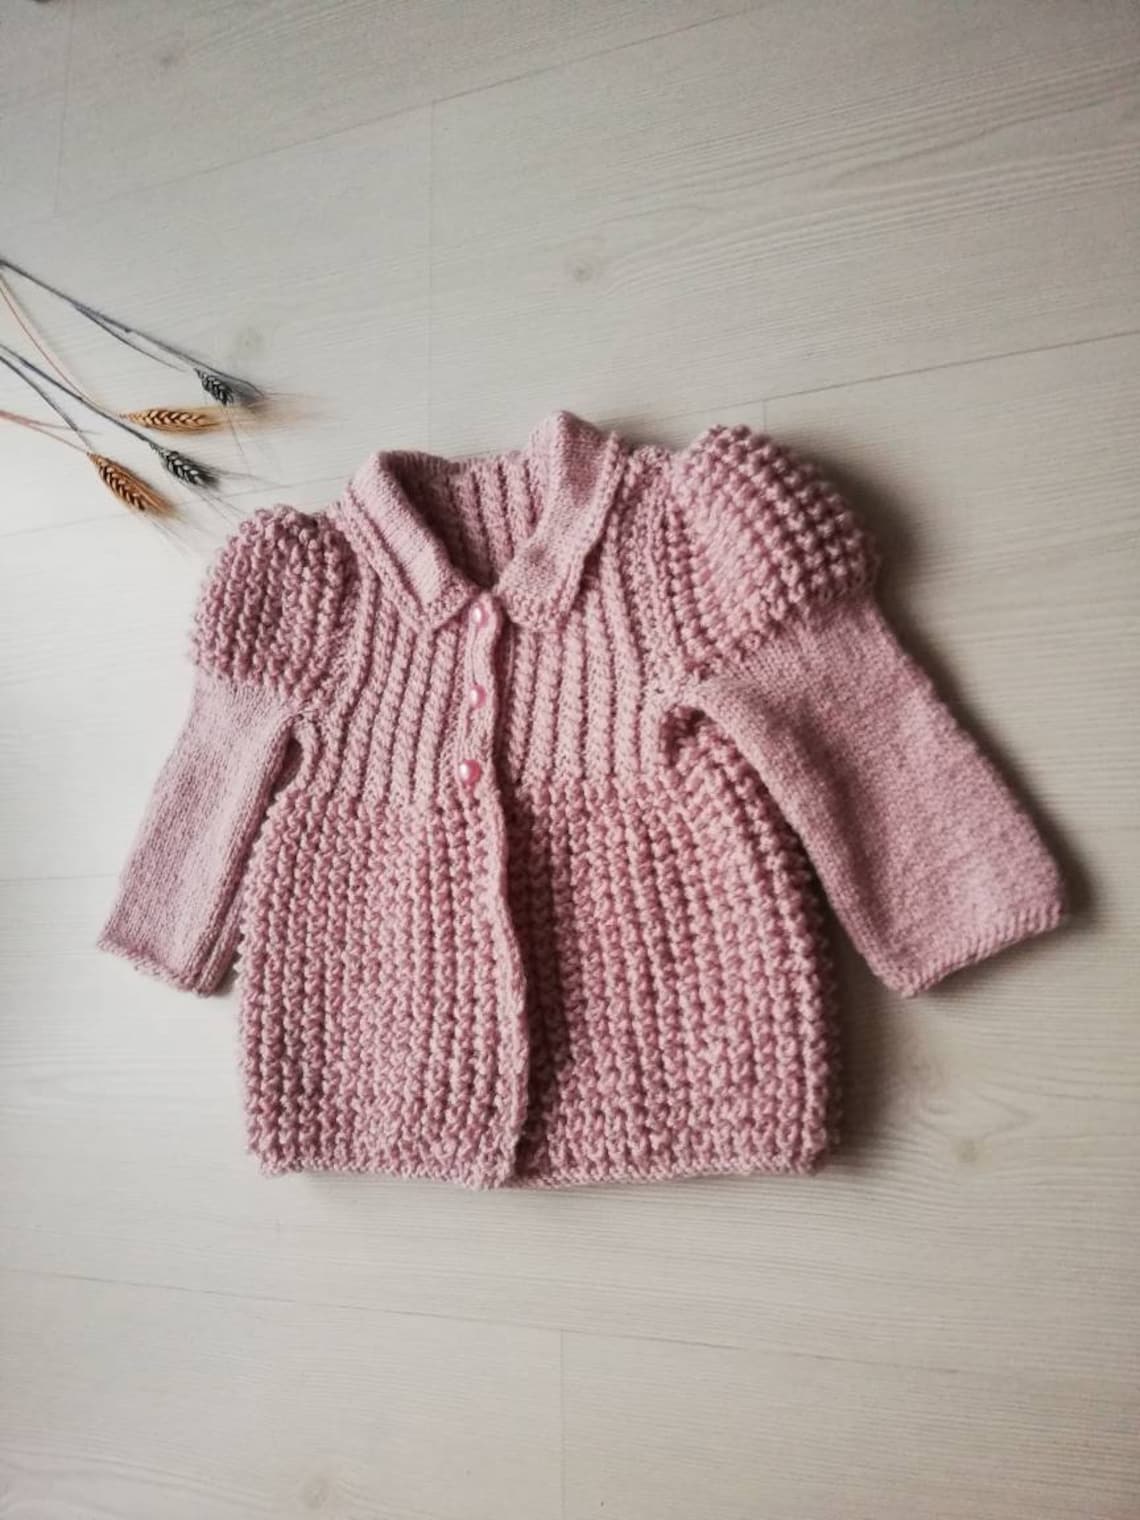 Knitted Baby Bubble Sweater-Knit Organic Cotton Bubble | Etsy